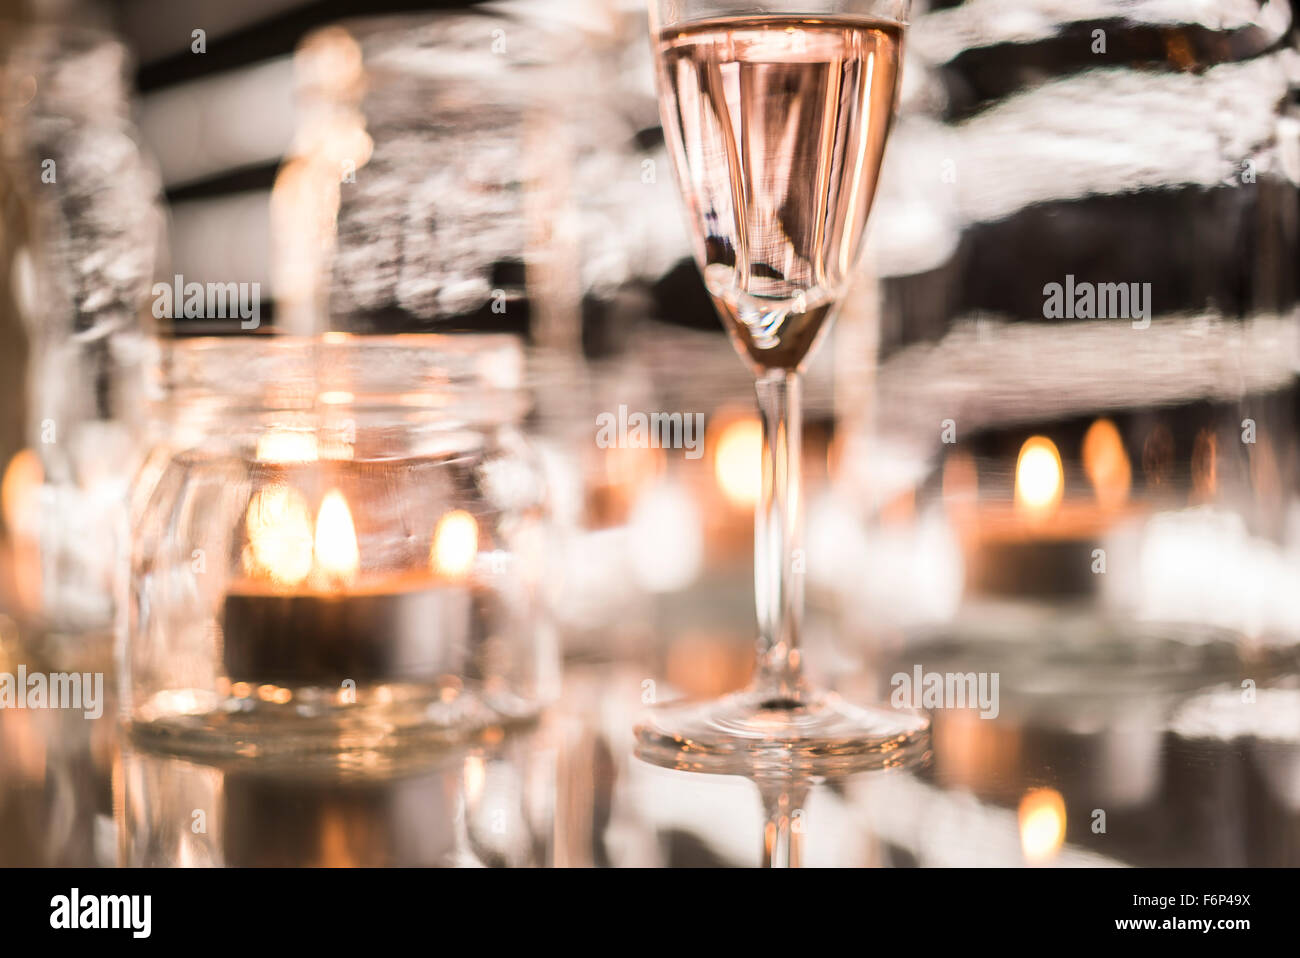 White wine glass and candles in glass jars Stock Photo